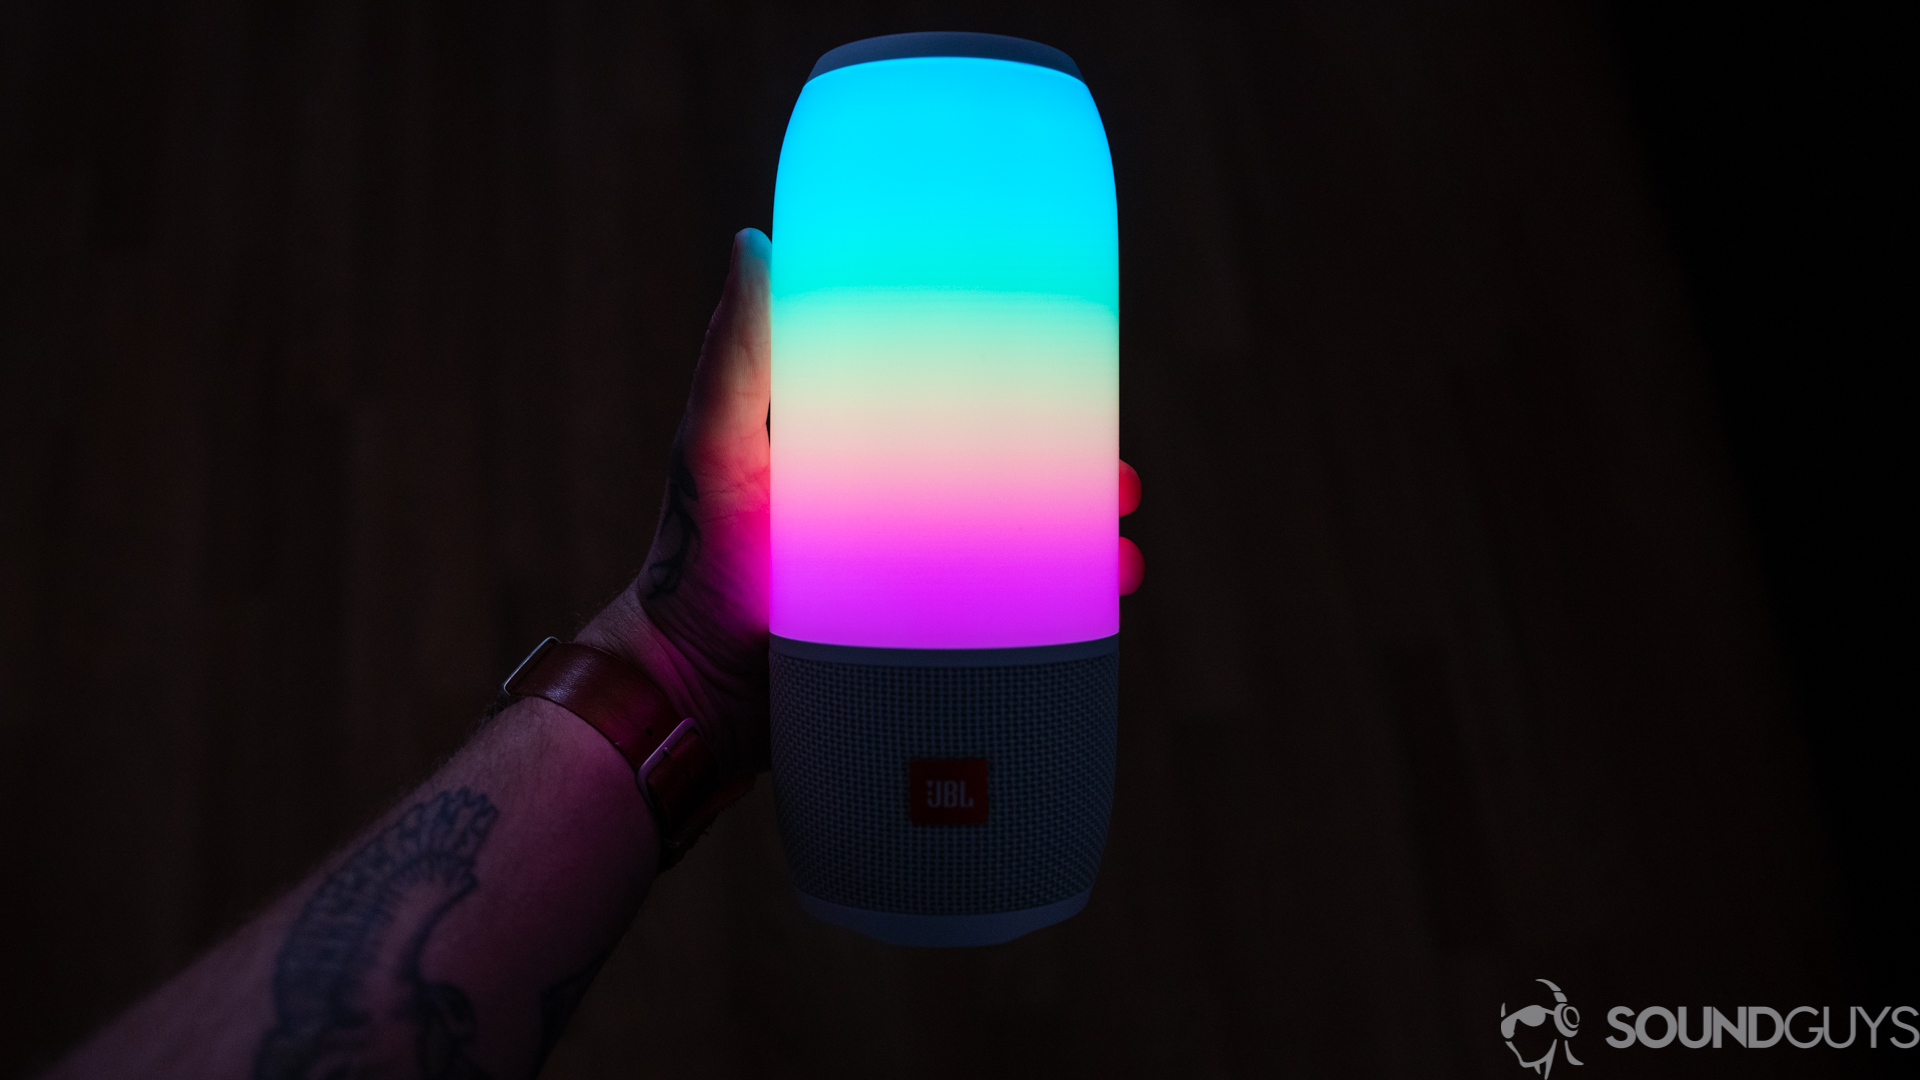 Shot of the colorful lights of the JBL Pulse 3 held in hand in a dark room.